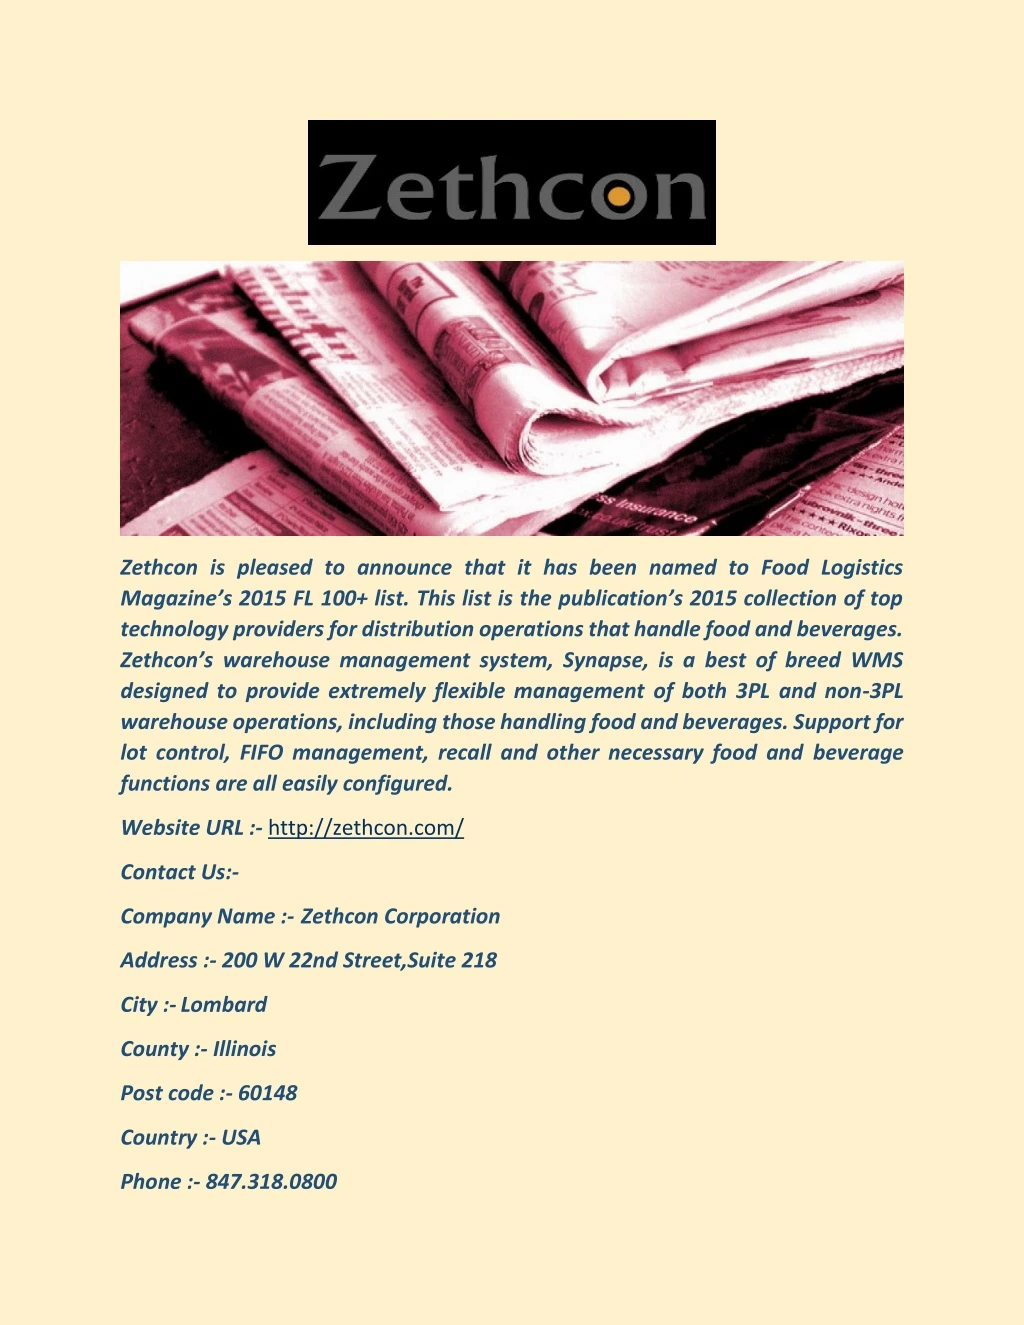 zethcon is pleased to announce that it has been